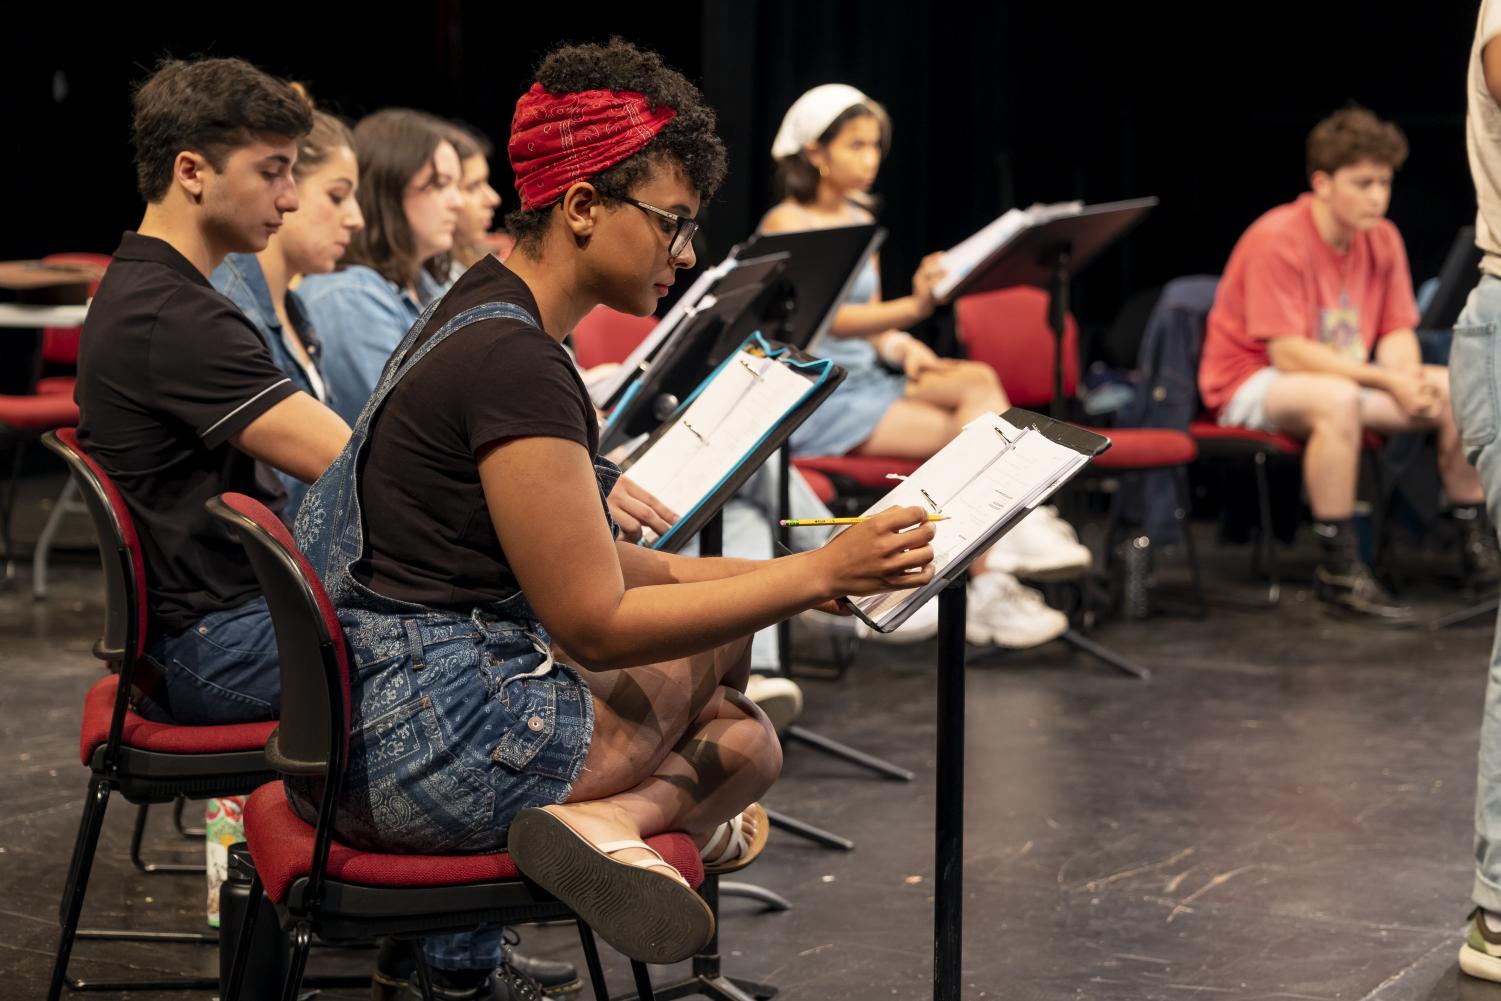 A person wearing denim overalls, a black T-shirt and a red bandana in their hair takes notes in a binder on a music stand.